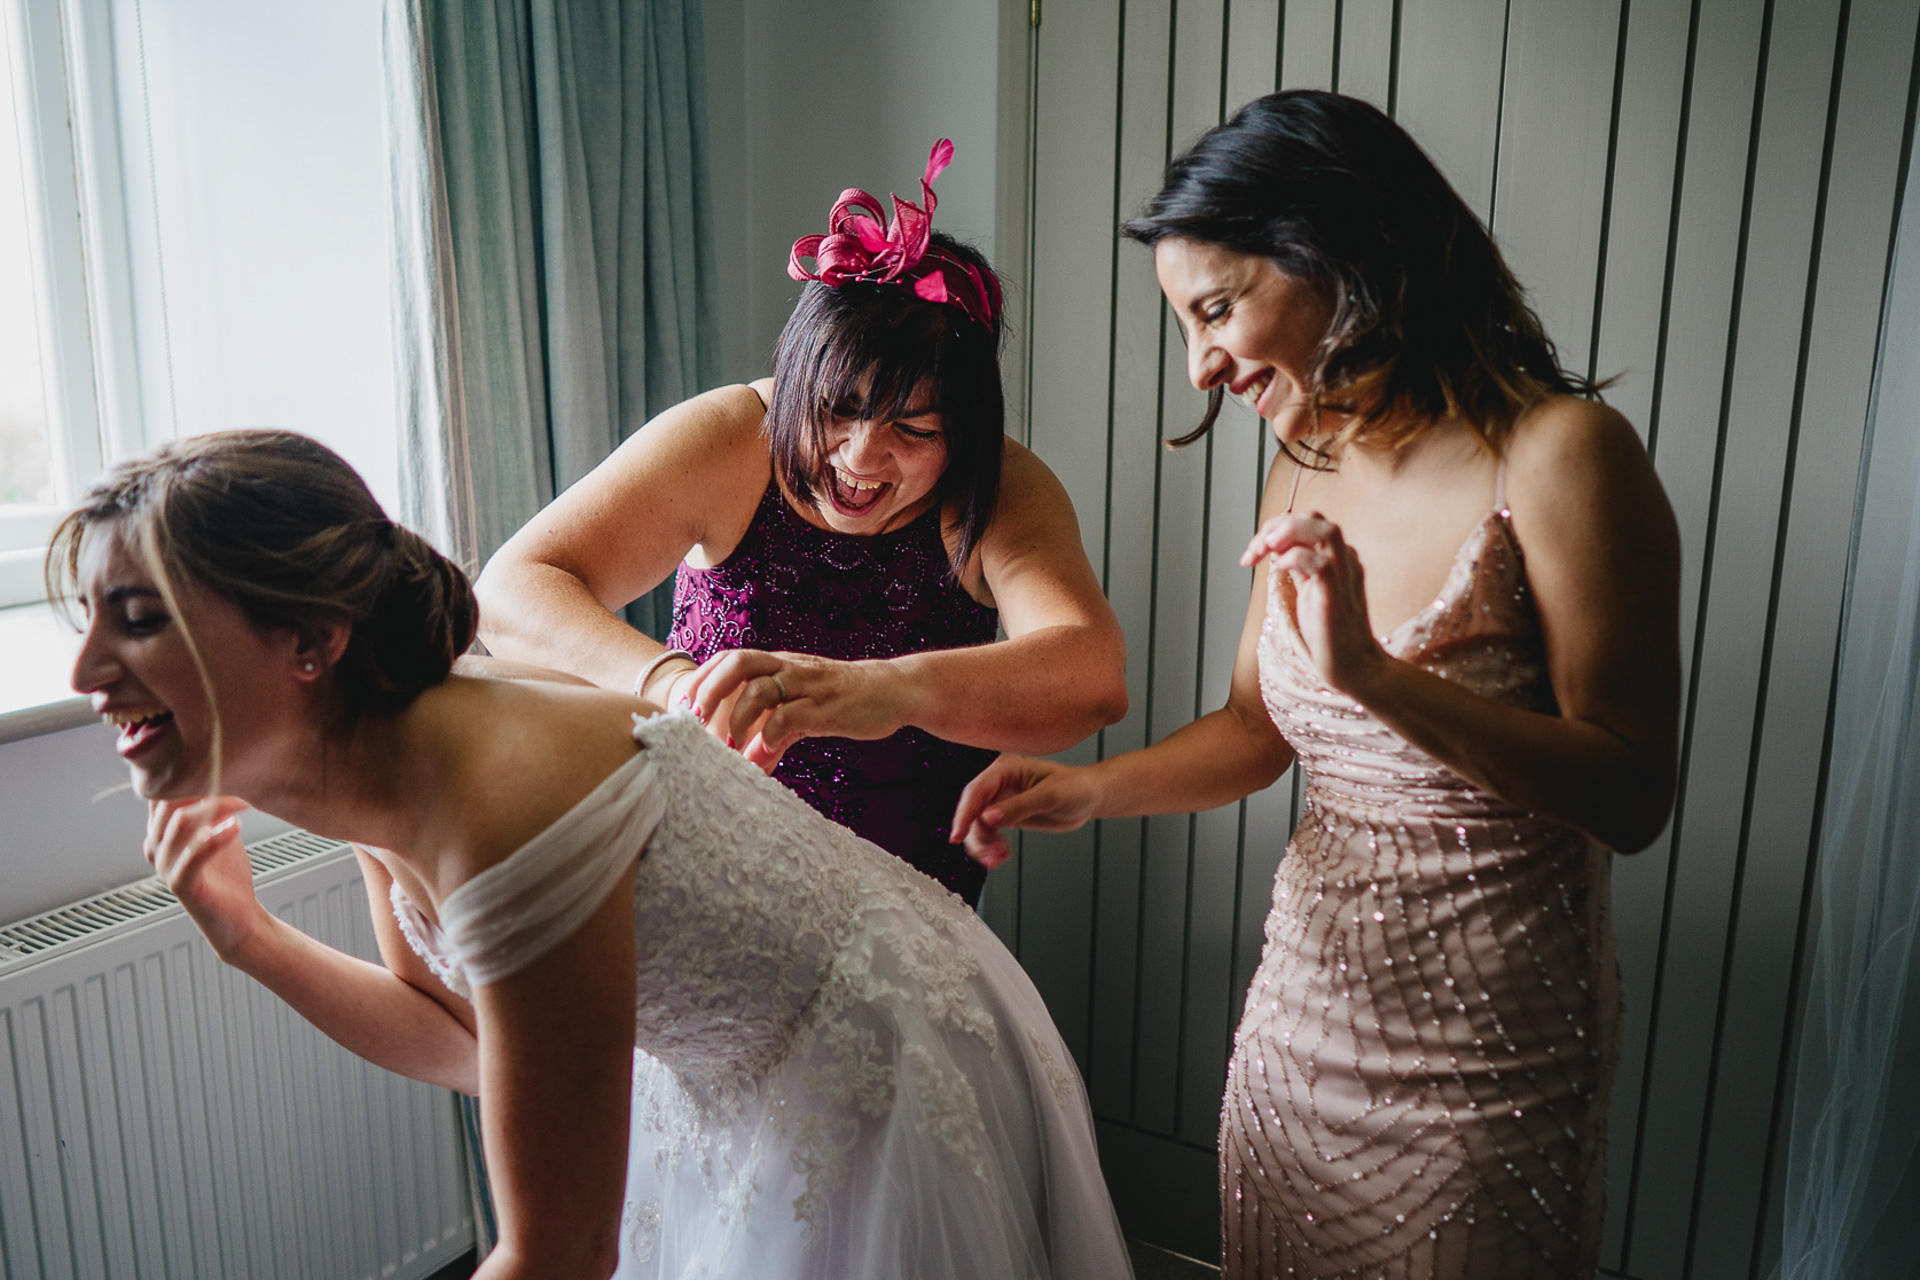 Three women laughing together putting on a wedding dress